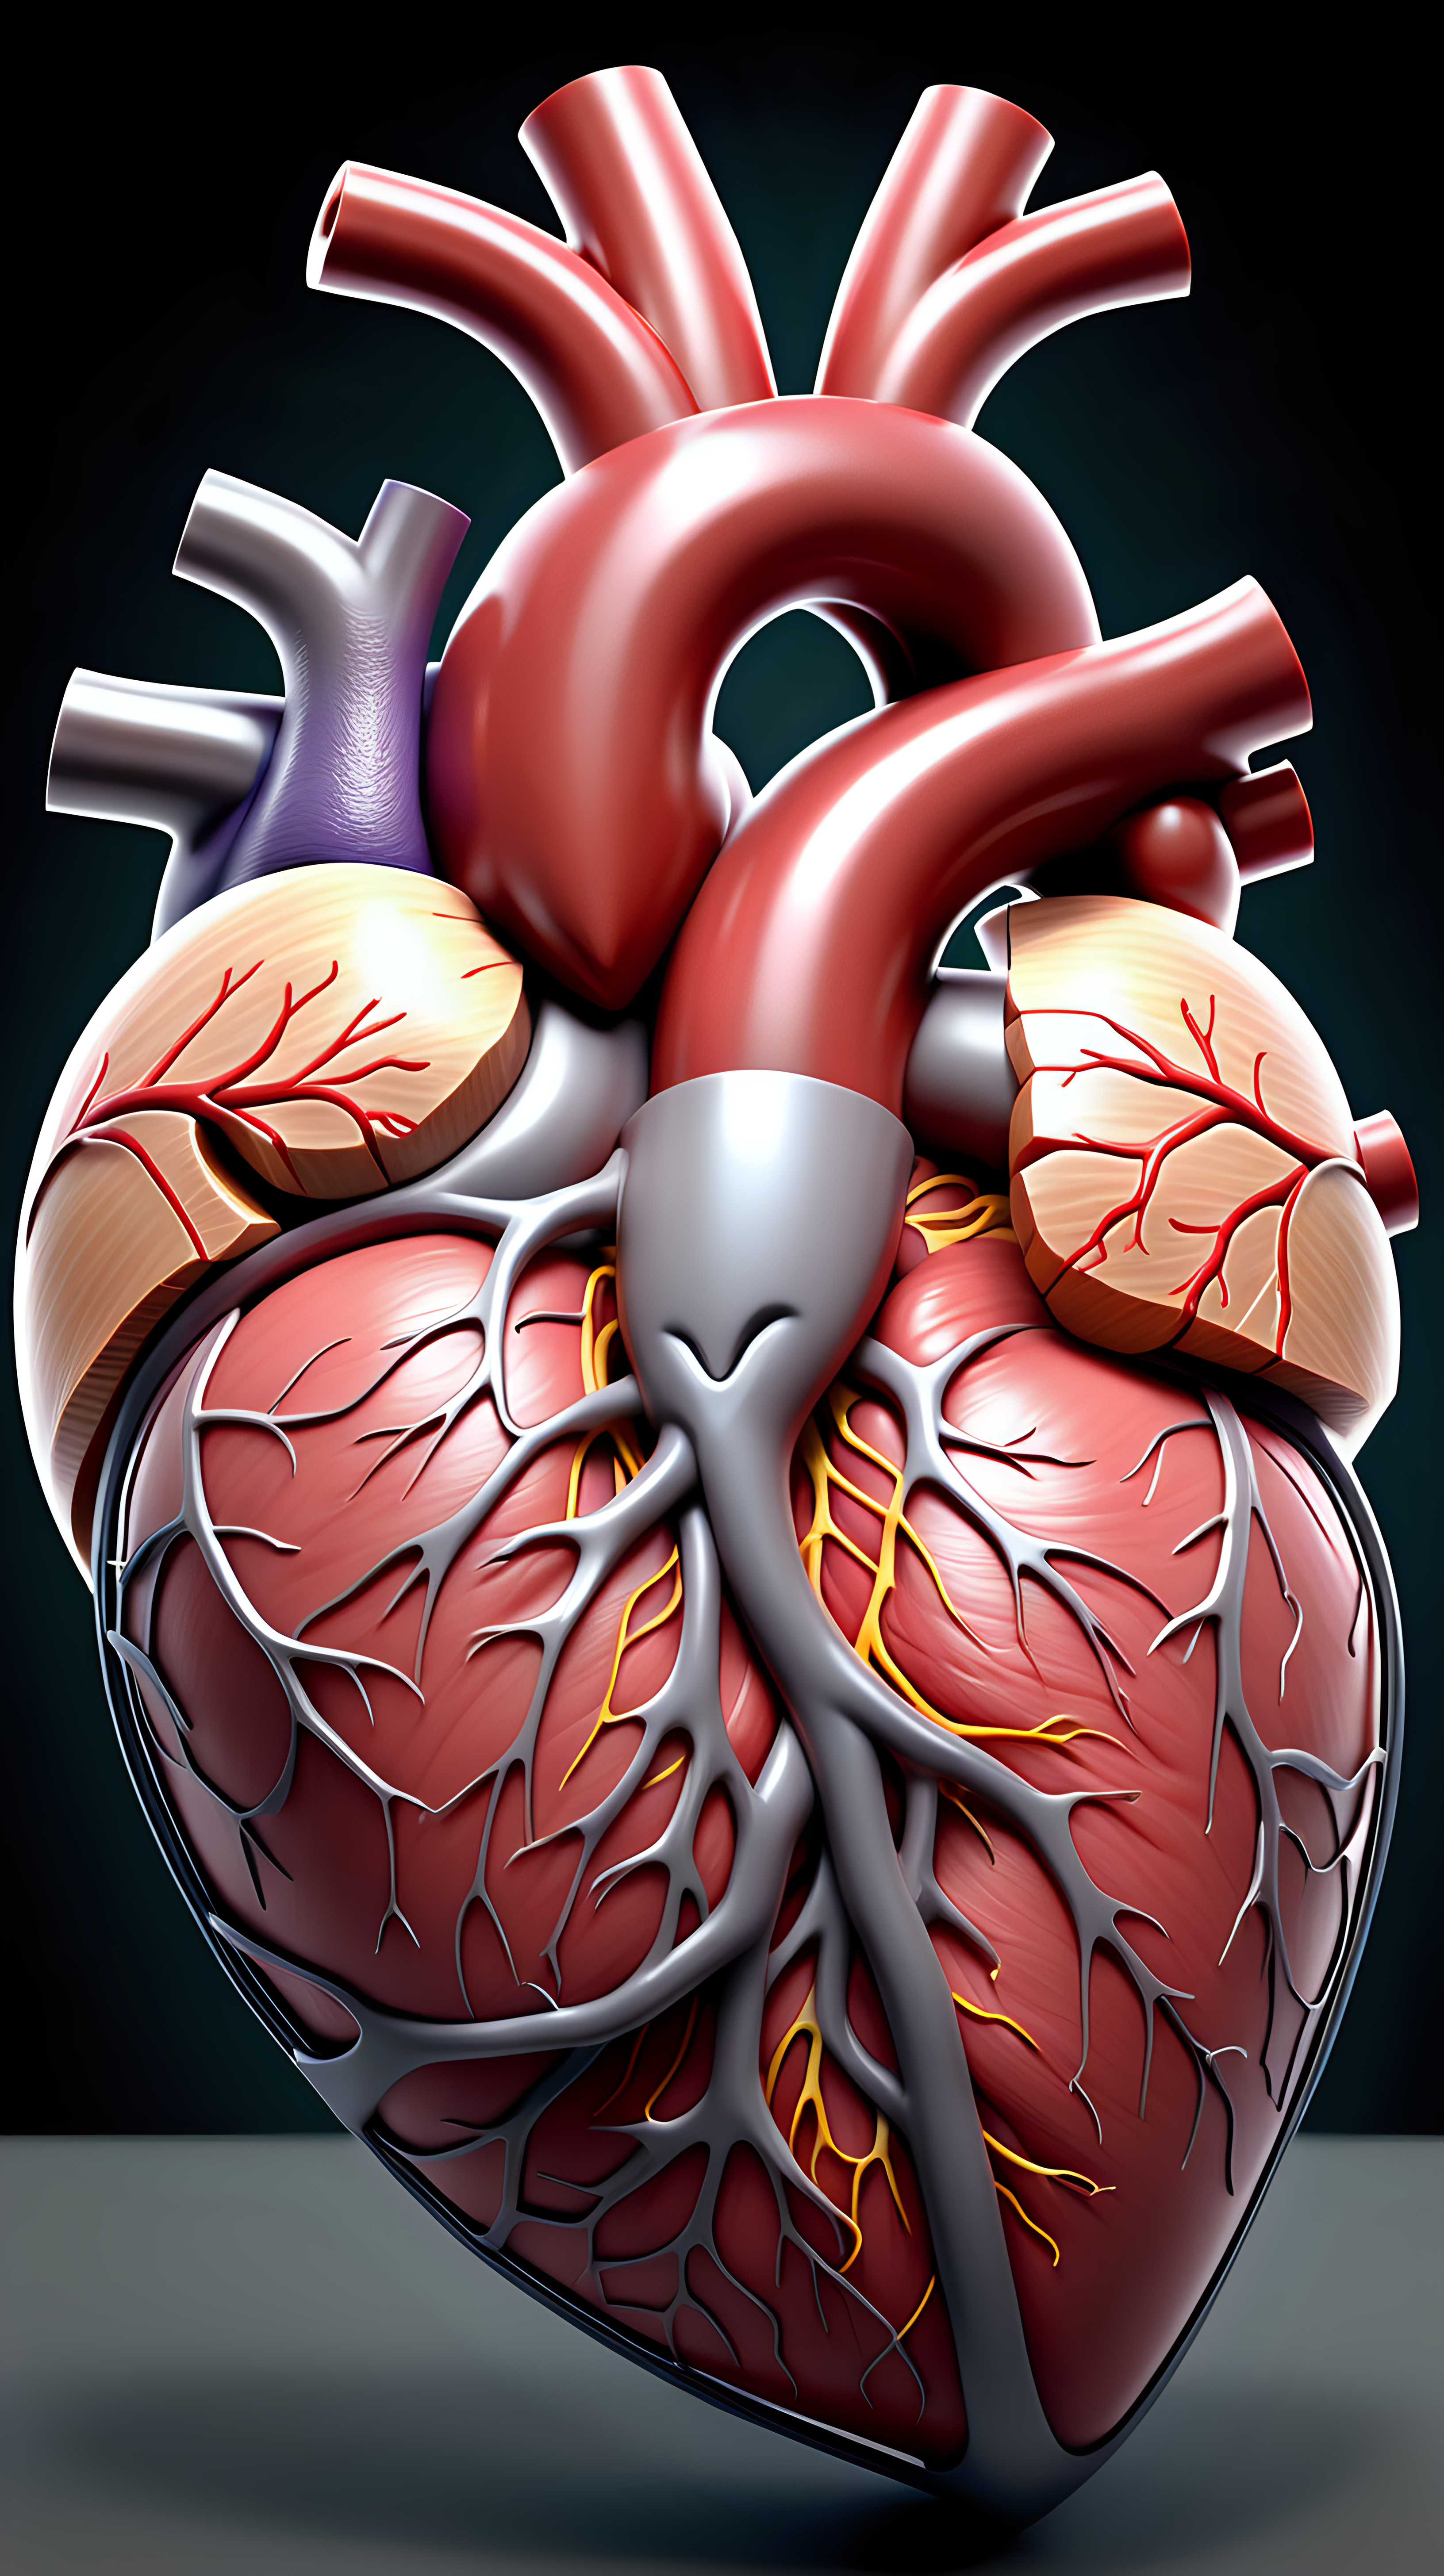 a detailed and realistic illustration of a human heart inside the chest, resembling an anatomy book. Capture the intricate details and textures. Use a high-quality camera model and lens to ensure sharpness and clarity. Illuminate the scene with soft and natural lighting to highlight the anatomical features. Aim for a scientific and informative style of photography